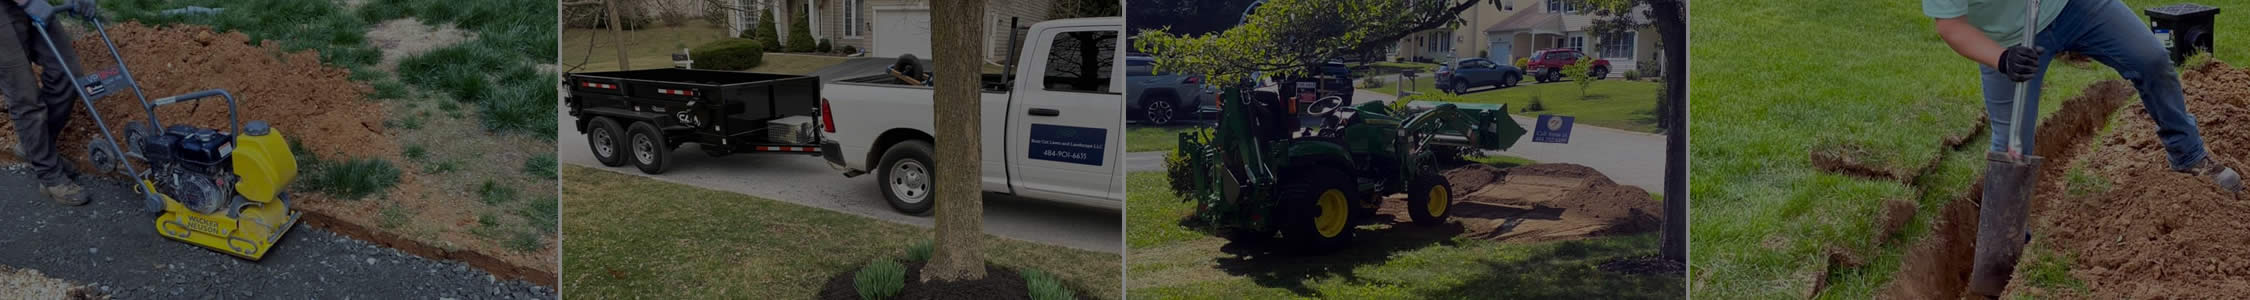 Contact CMG Landscape Company in Chester Springs PA